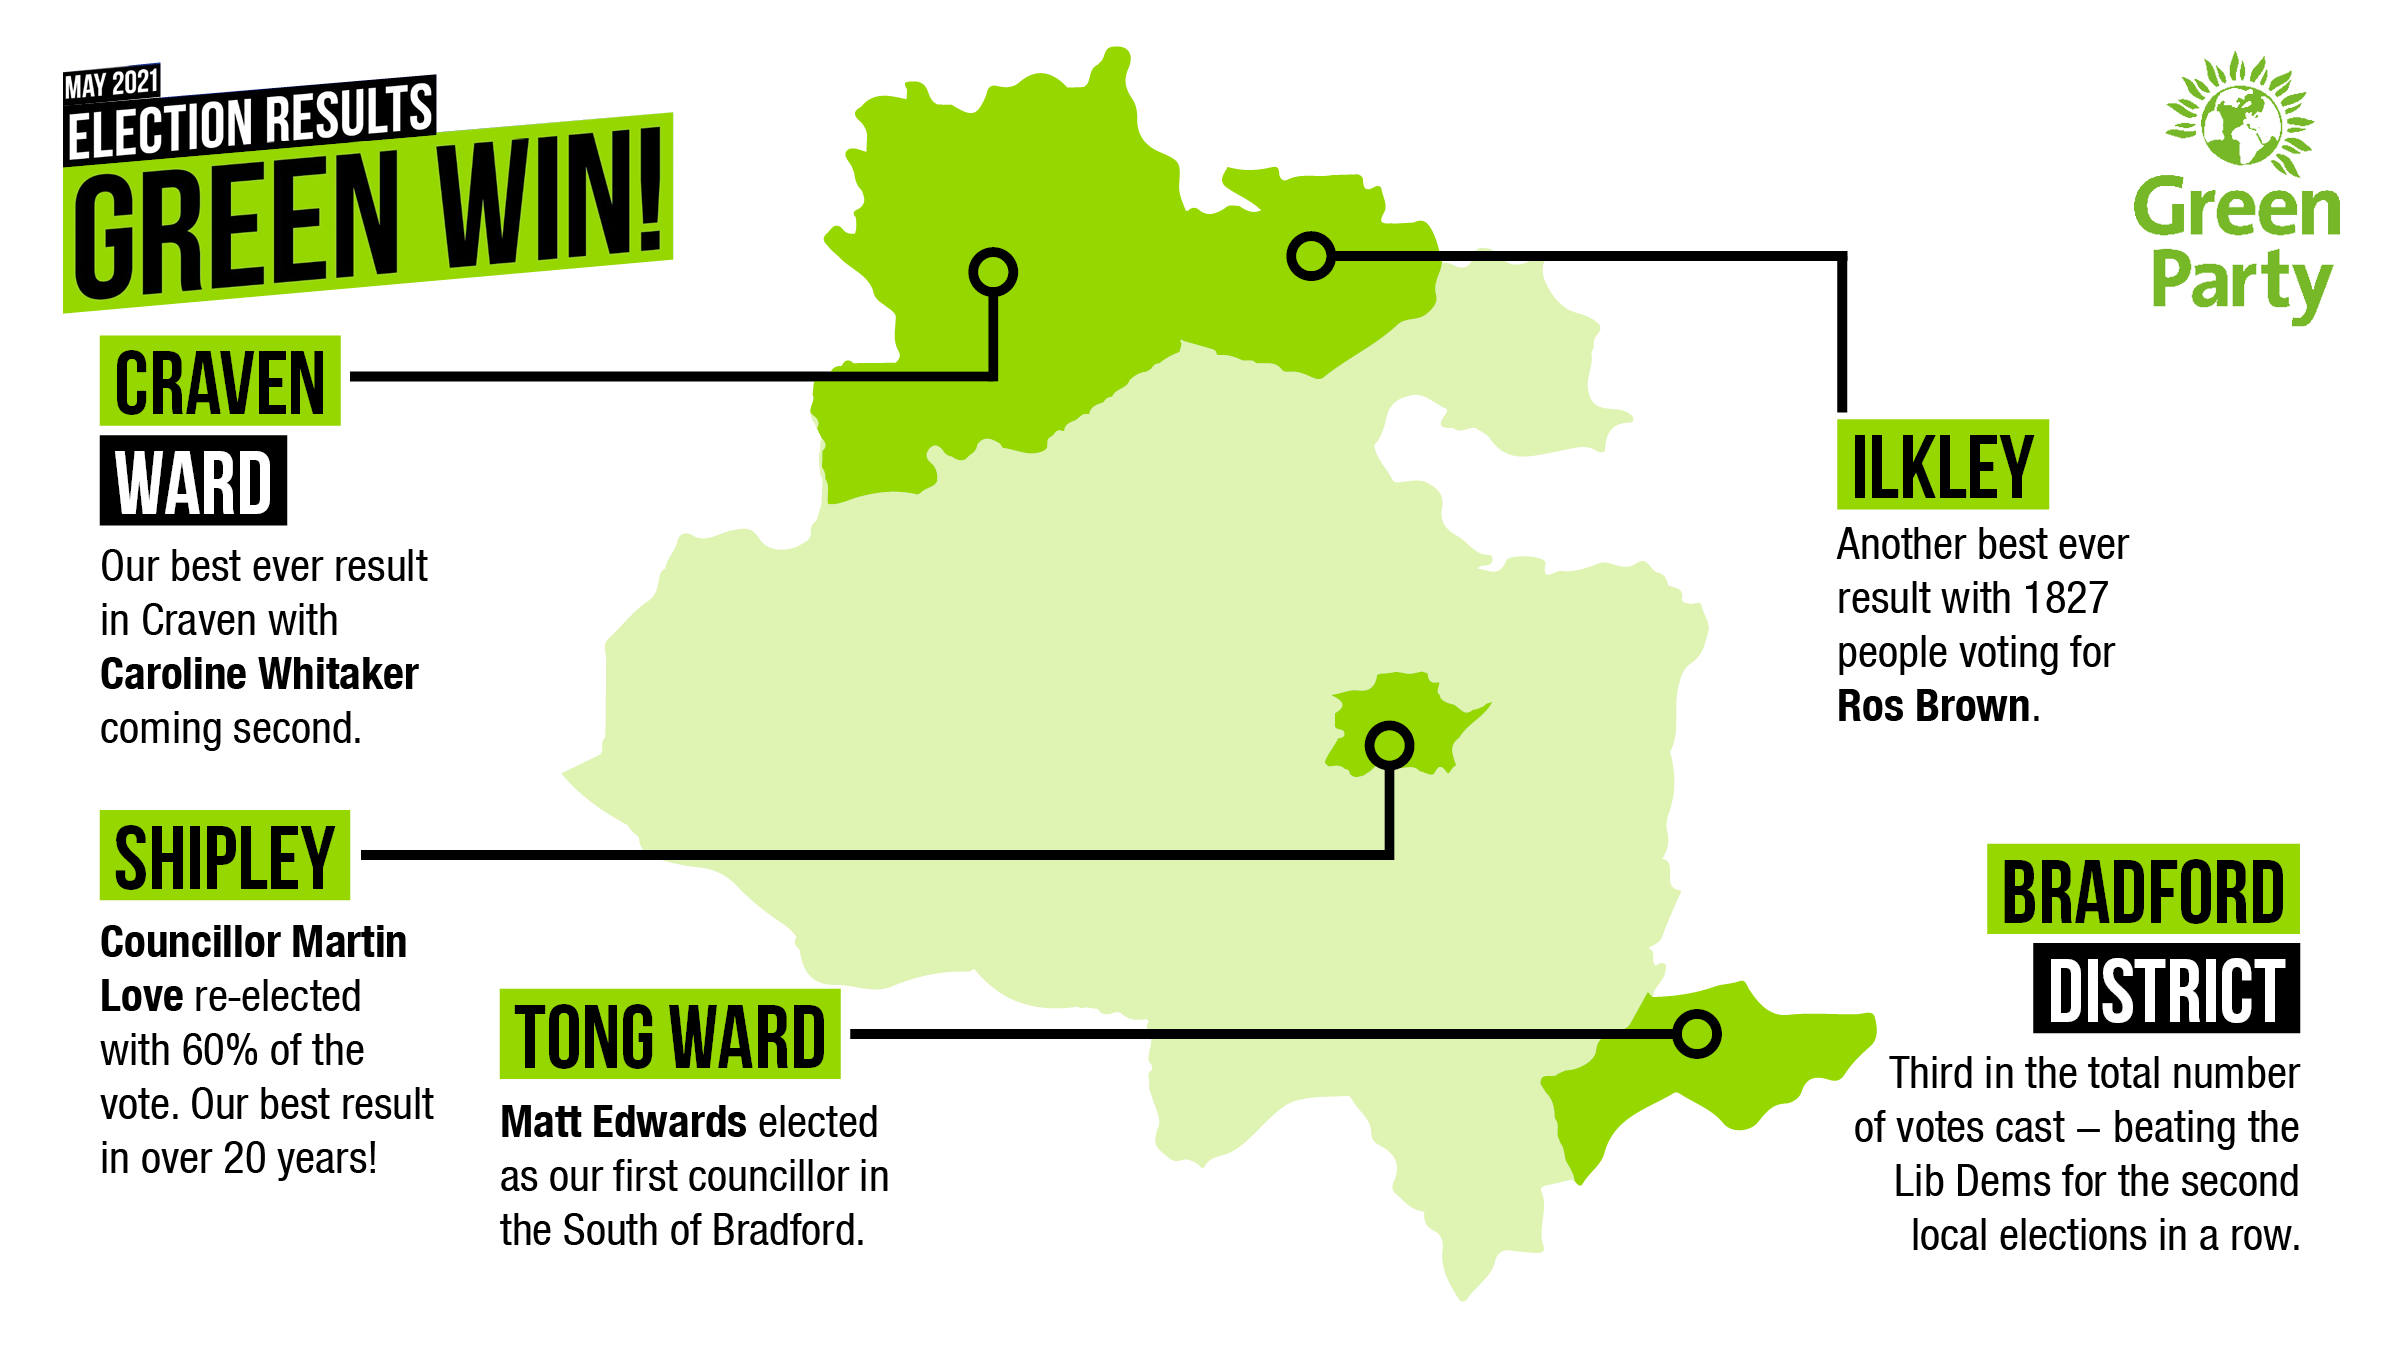 A Map showing all the Green Party successes of 2021.